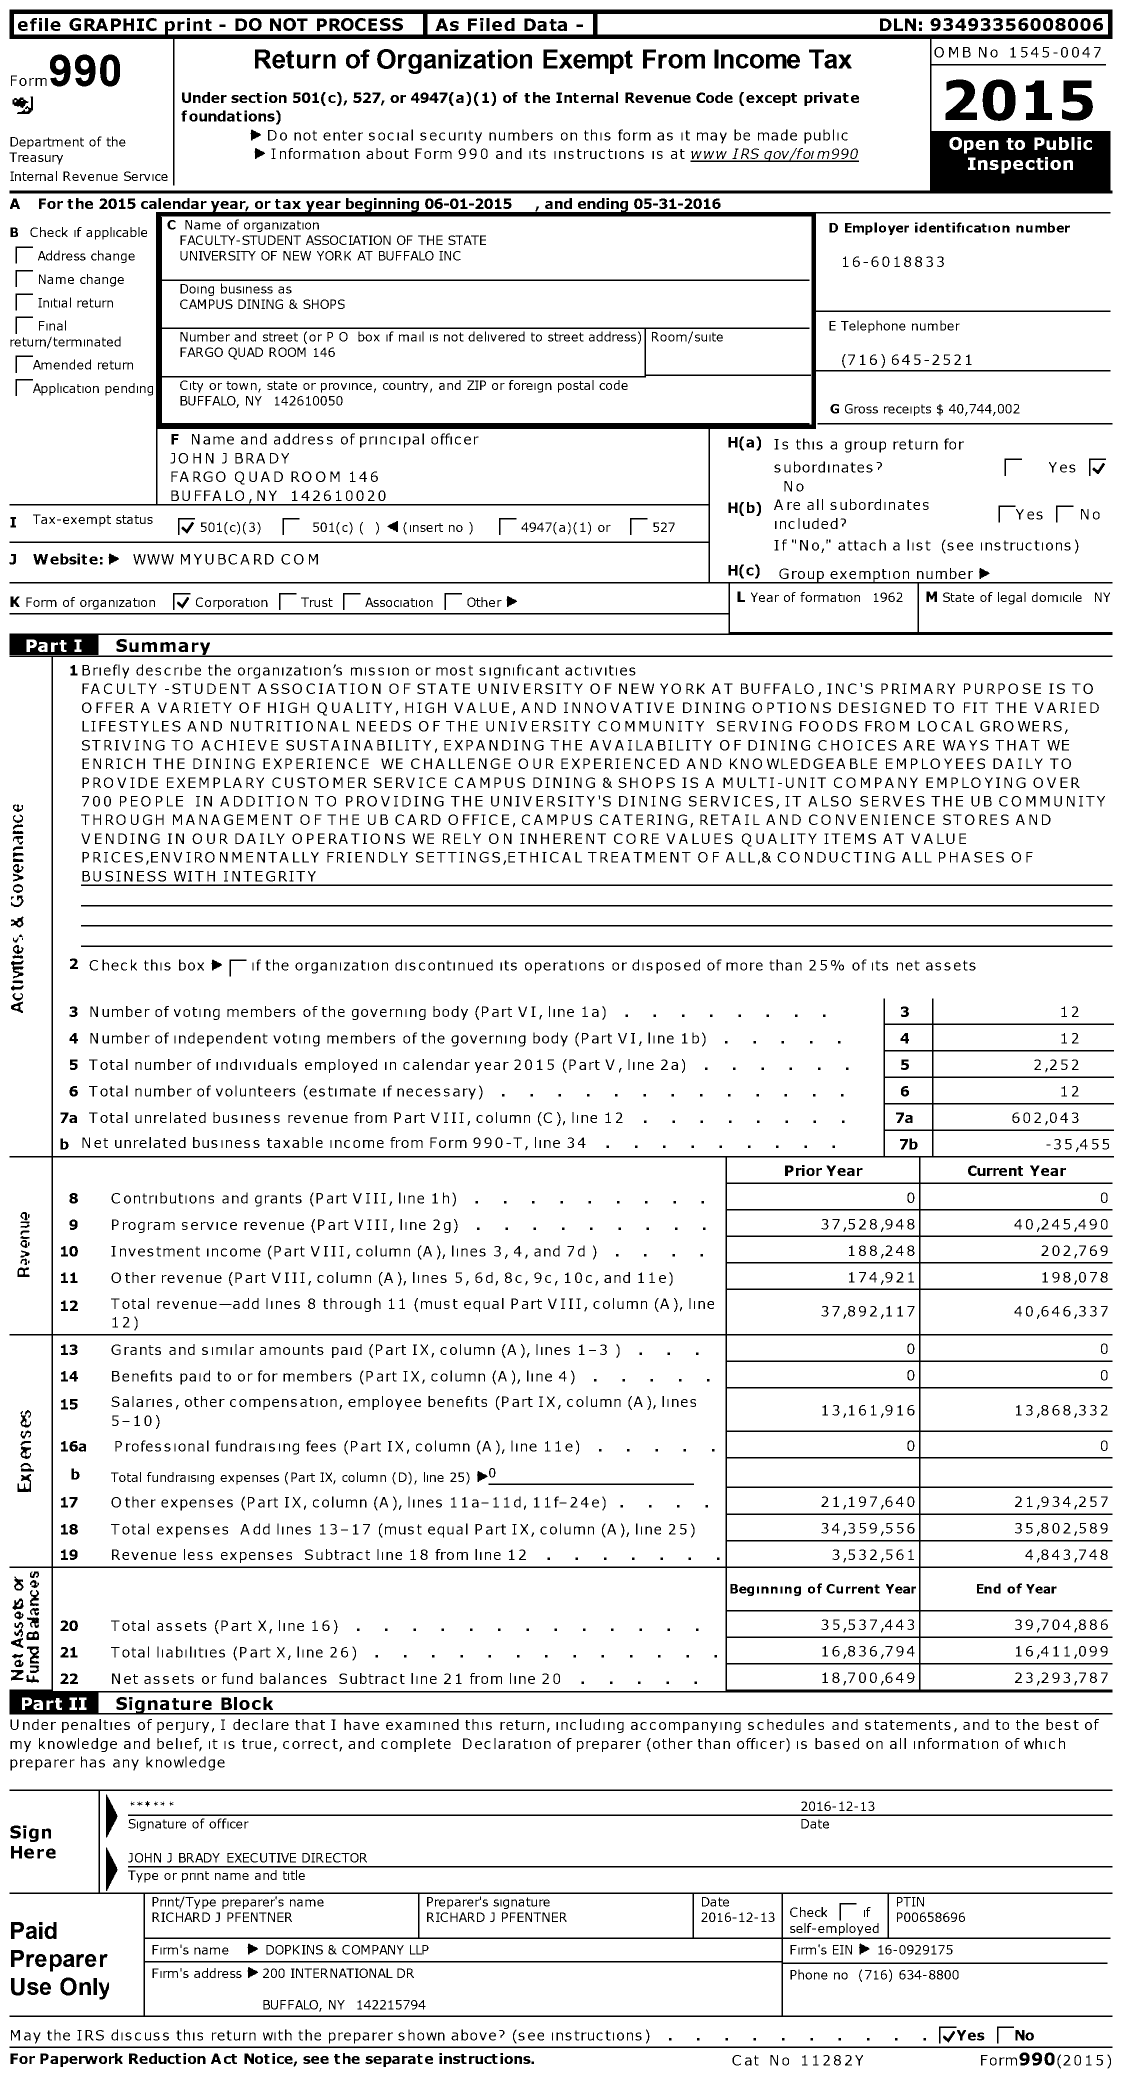 Image of first page of 2015 Form 990 for Campus dining and shops